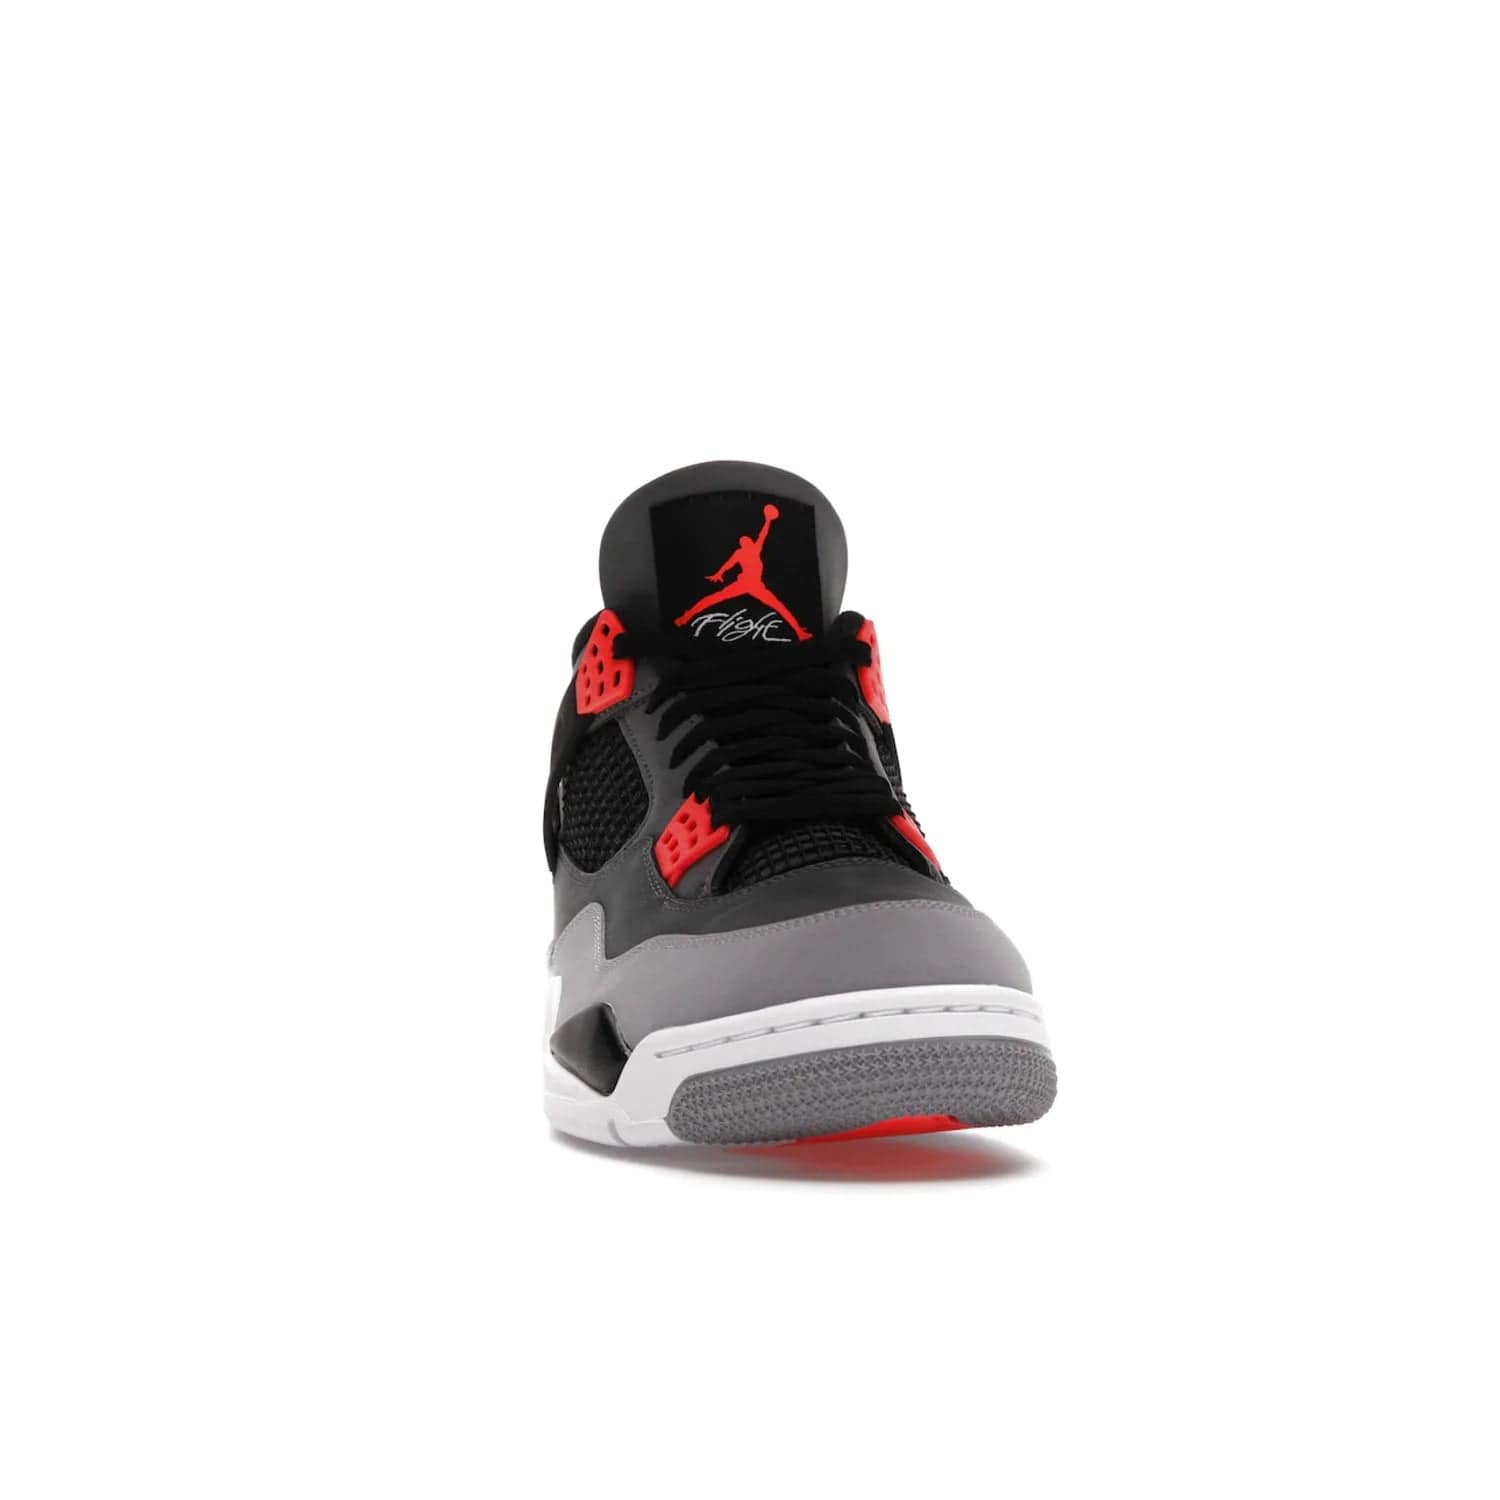 Jordan 4 Retro Infrared - Image 9 - Only at www.BallersClubKickz.com - Introducing the classic & timeless Air Jordan 4 Infrared. Durabuck upper, TPU mesh inserts, tech straps & heel tabs in dark grey and infrared accents. White sole with visible Air units. Out June 15, 2022. Get your pair now!